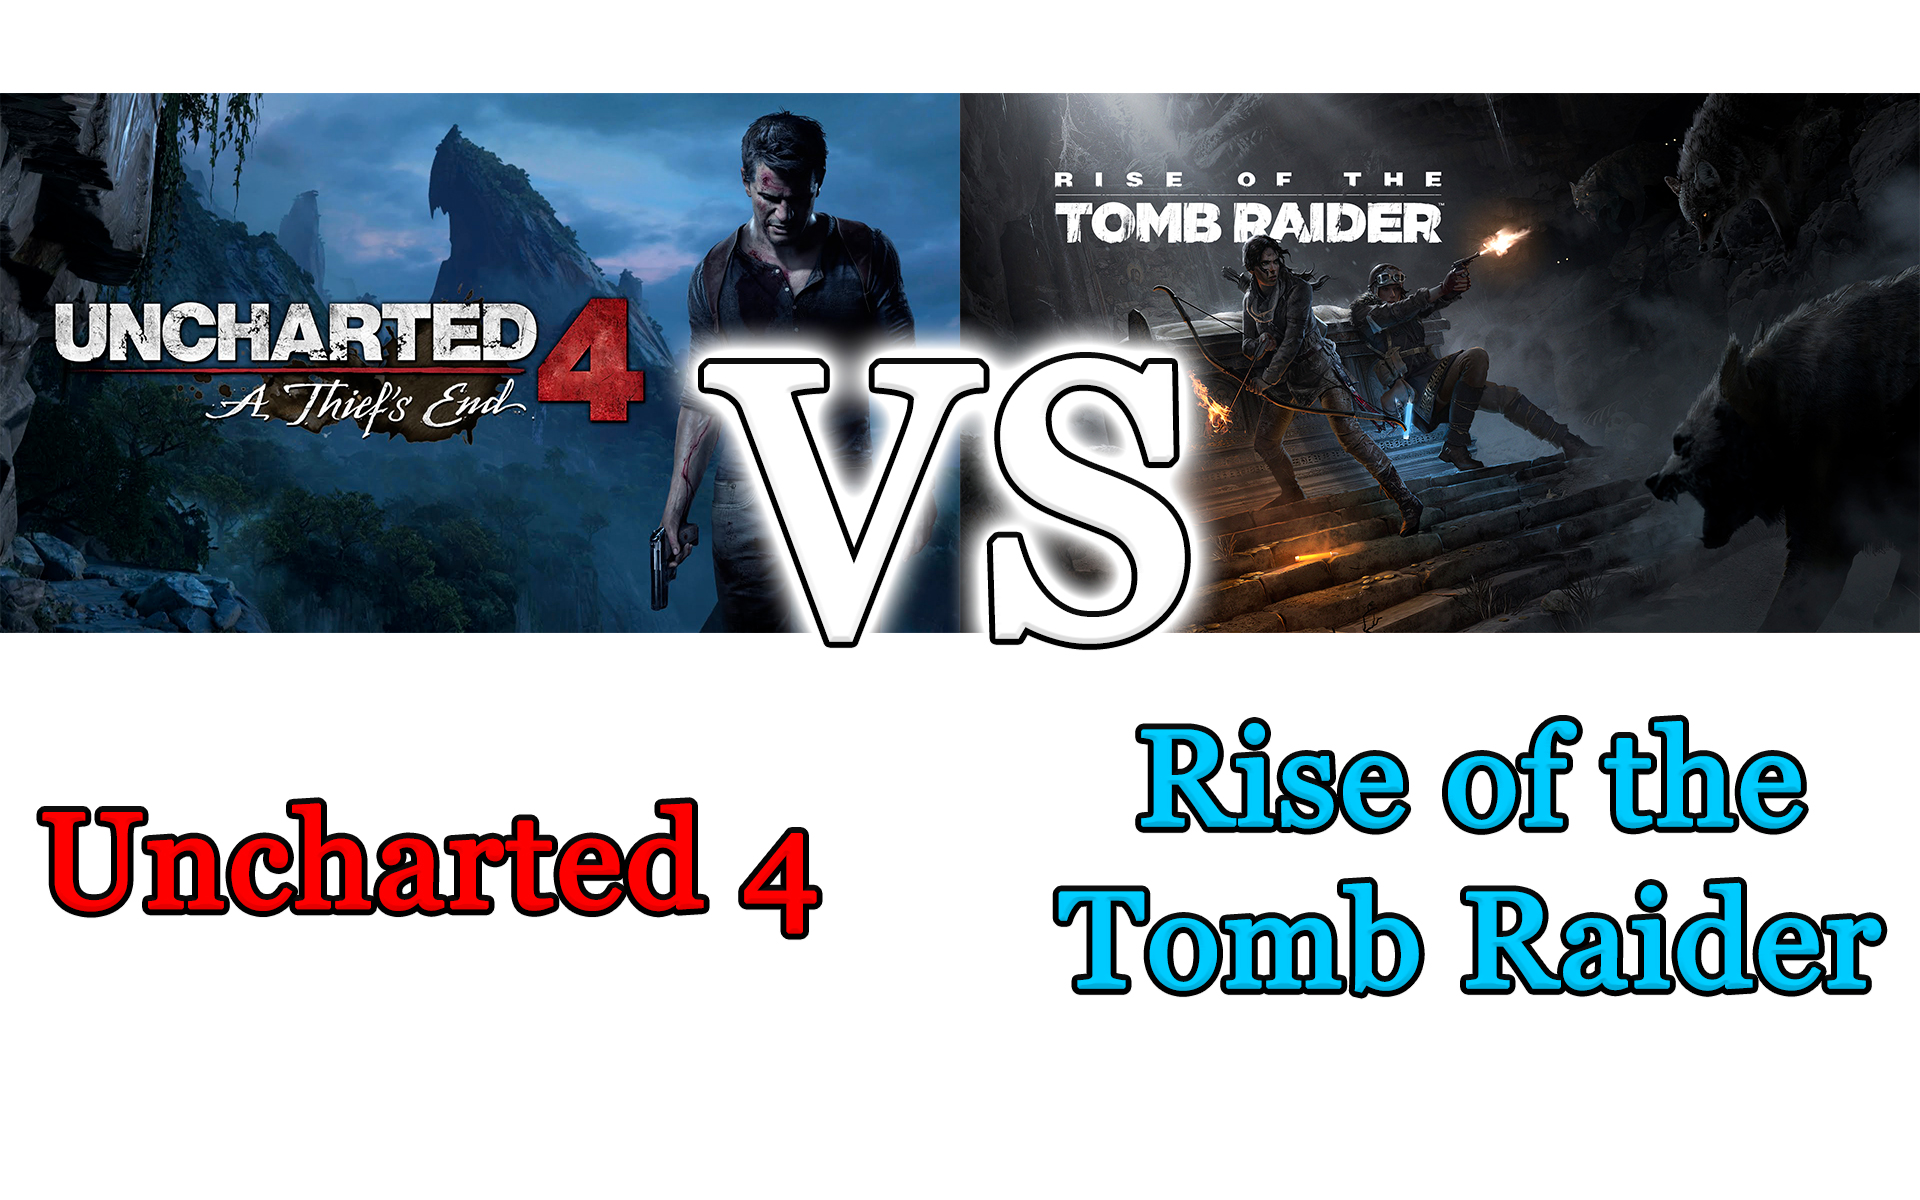 uncharted vs rise of the tomb raider